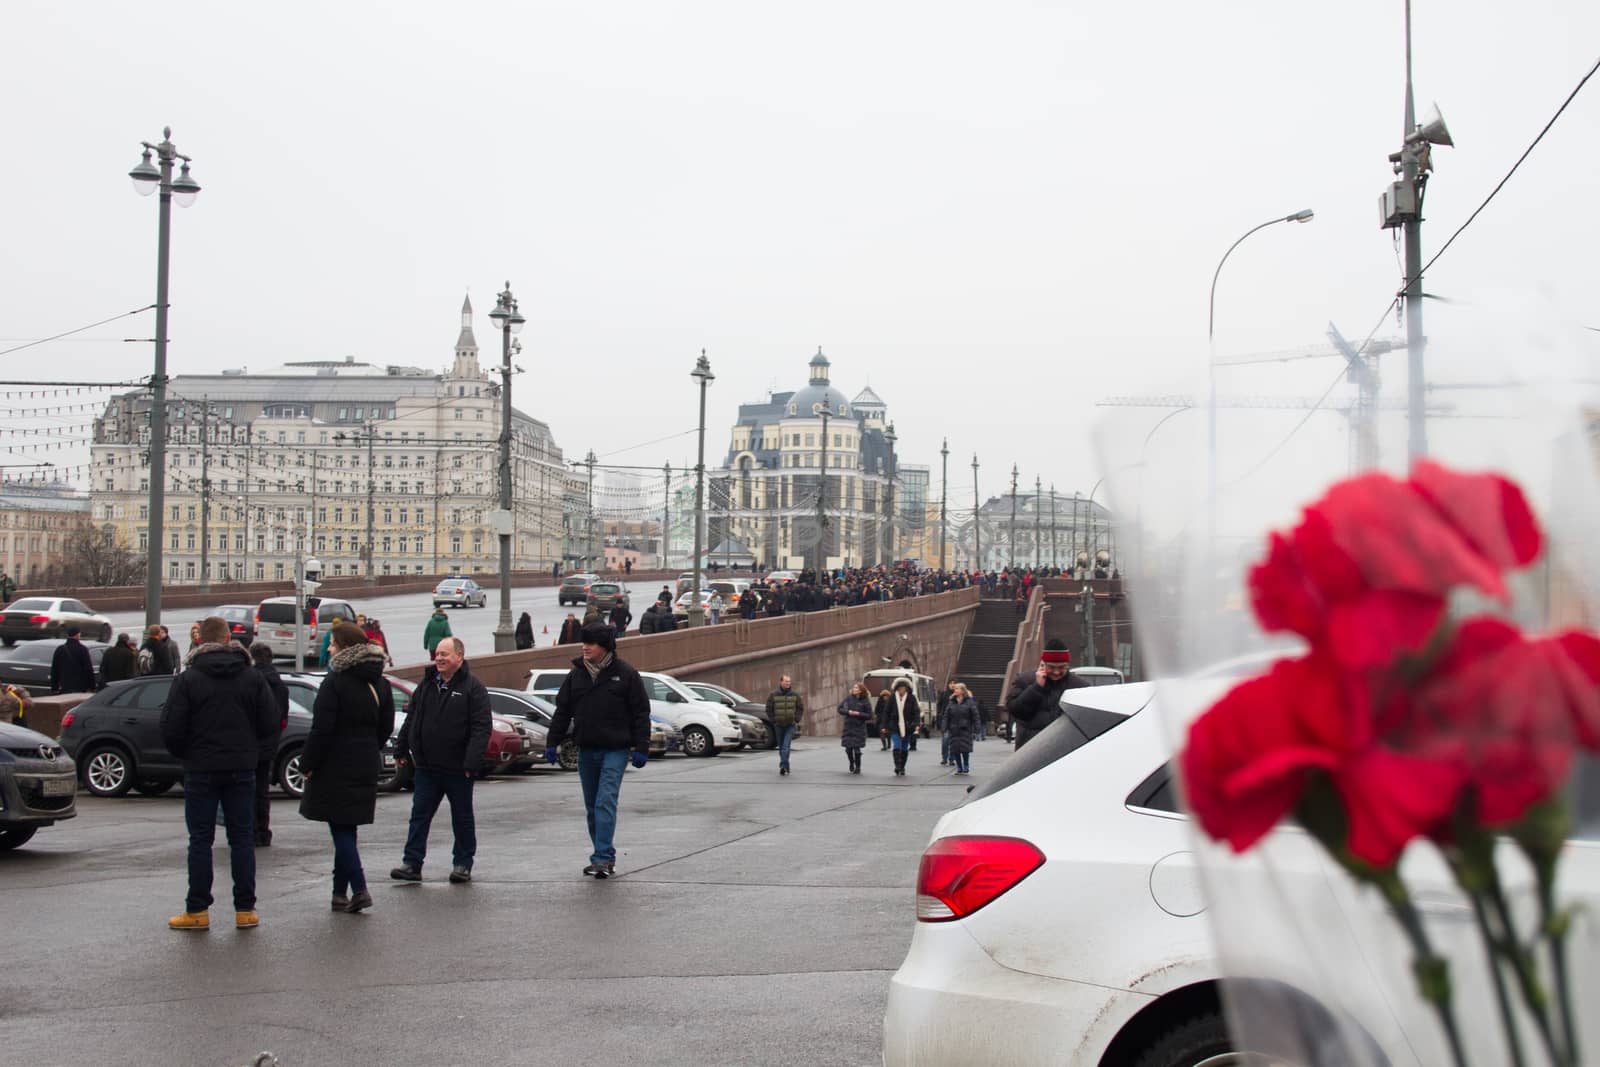 People bring flowers to the site of the murder of politician Boris Nemtsov by olegkozyrev